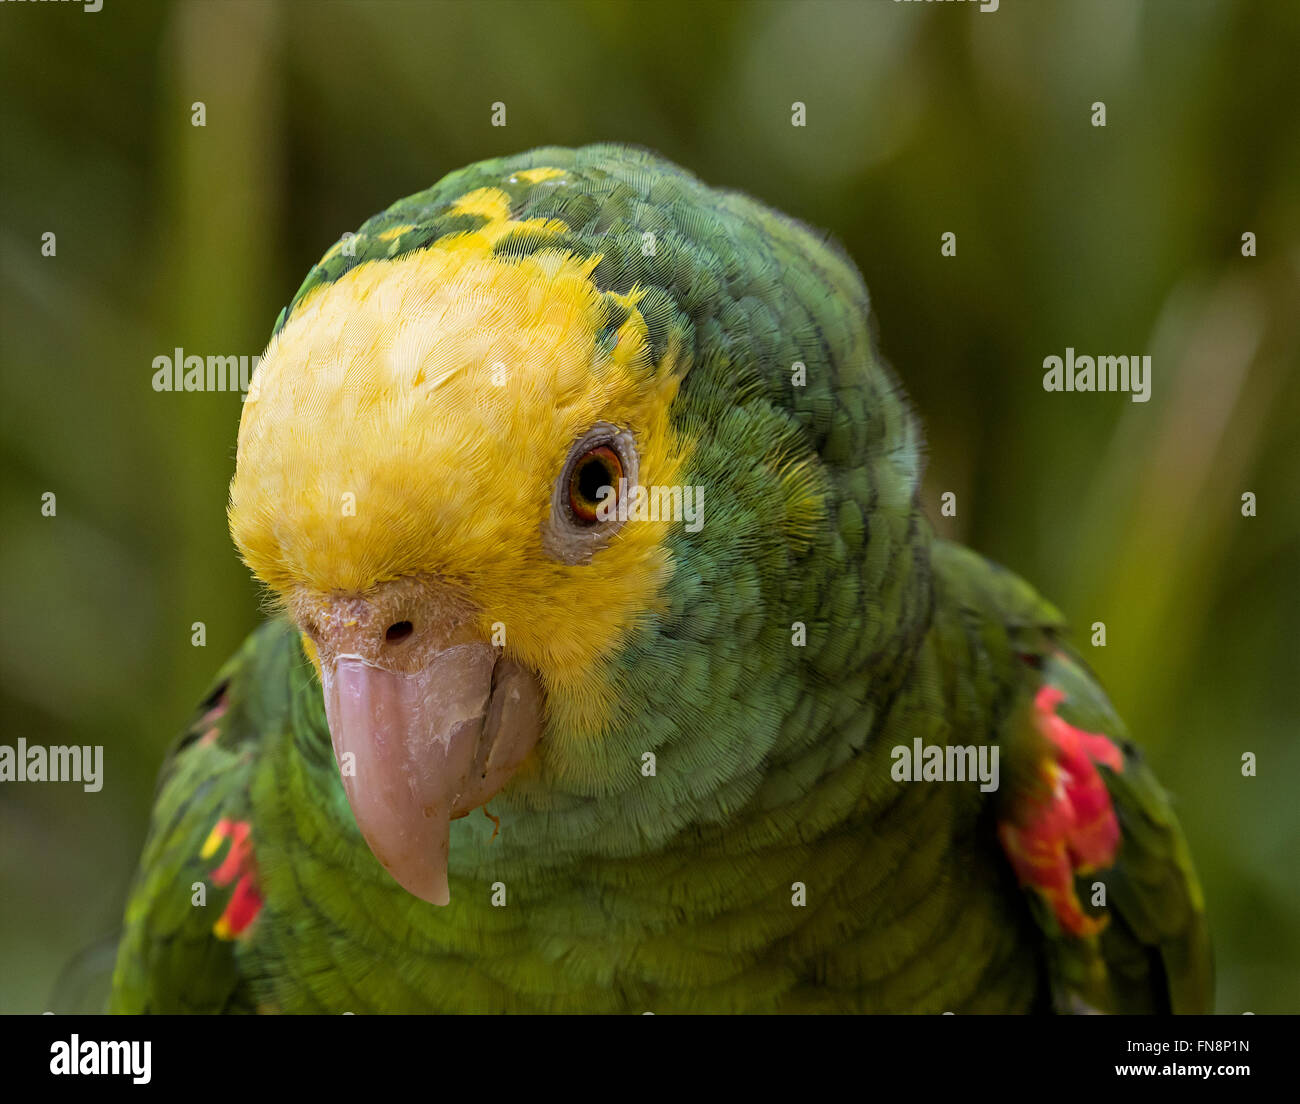 Amazon yellow-headed parrot photographed / pictured at Maleny Botanoc Garden Aviary Queensland, Australia Stock Photo